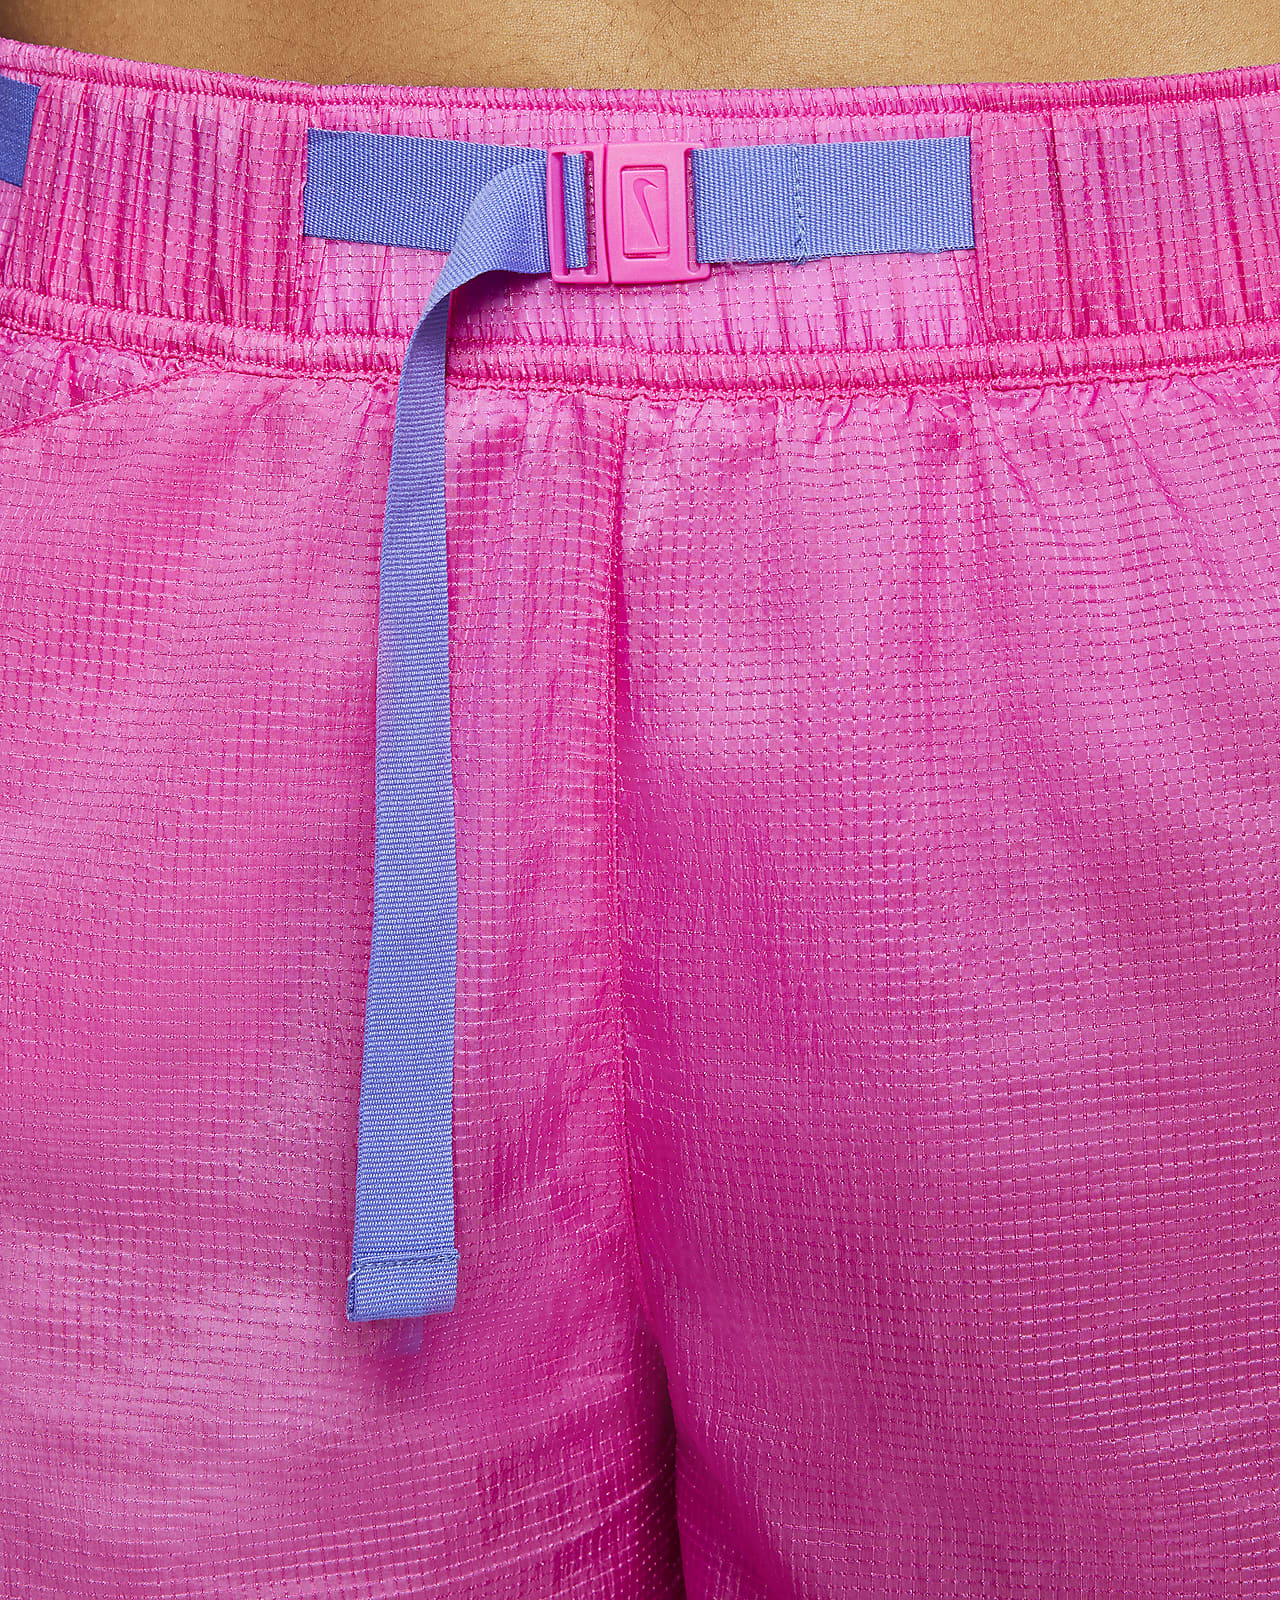 nike running shorts with belt detail in pink